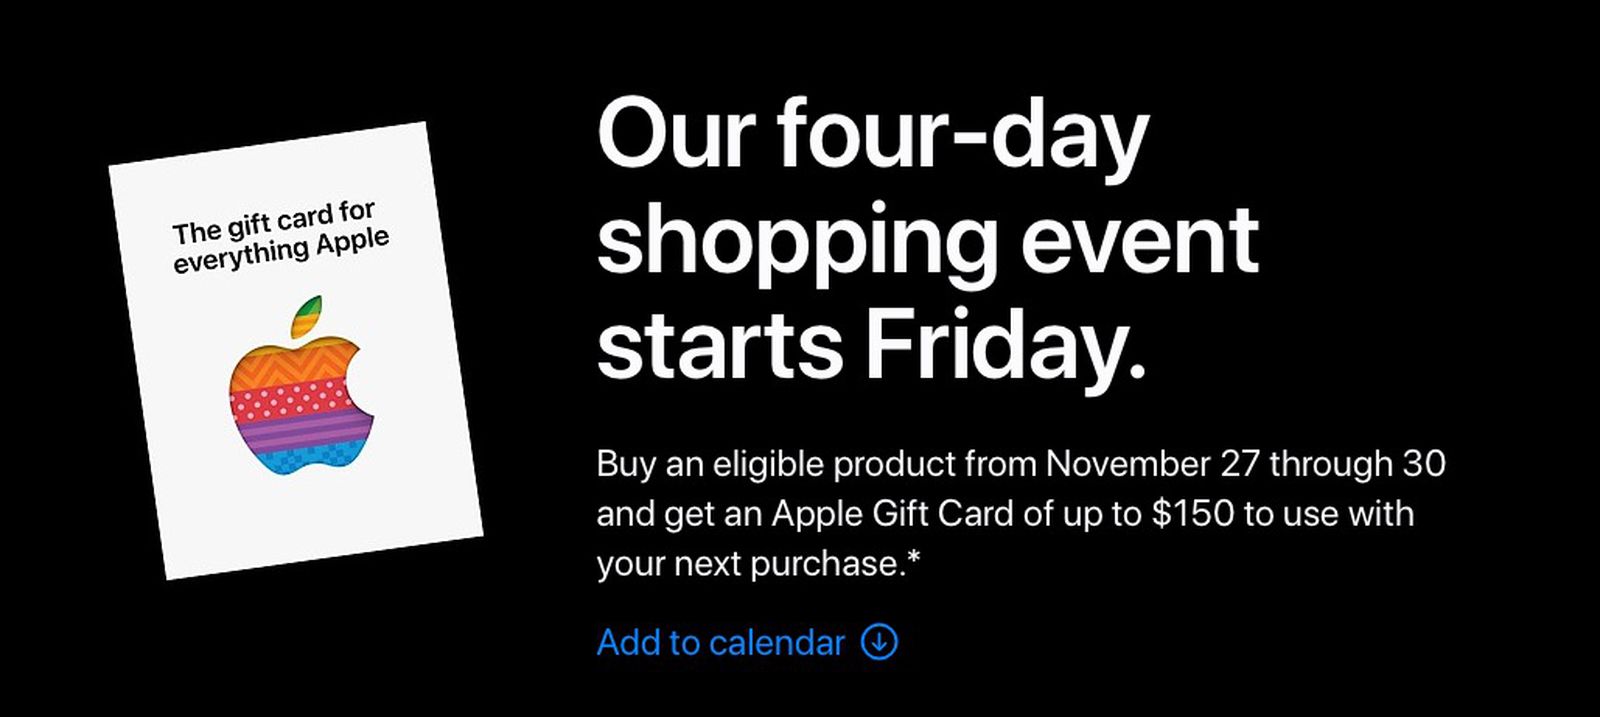 Apple offering gift cards with purchase on Black Friday - but